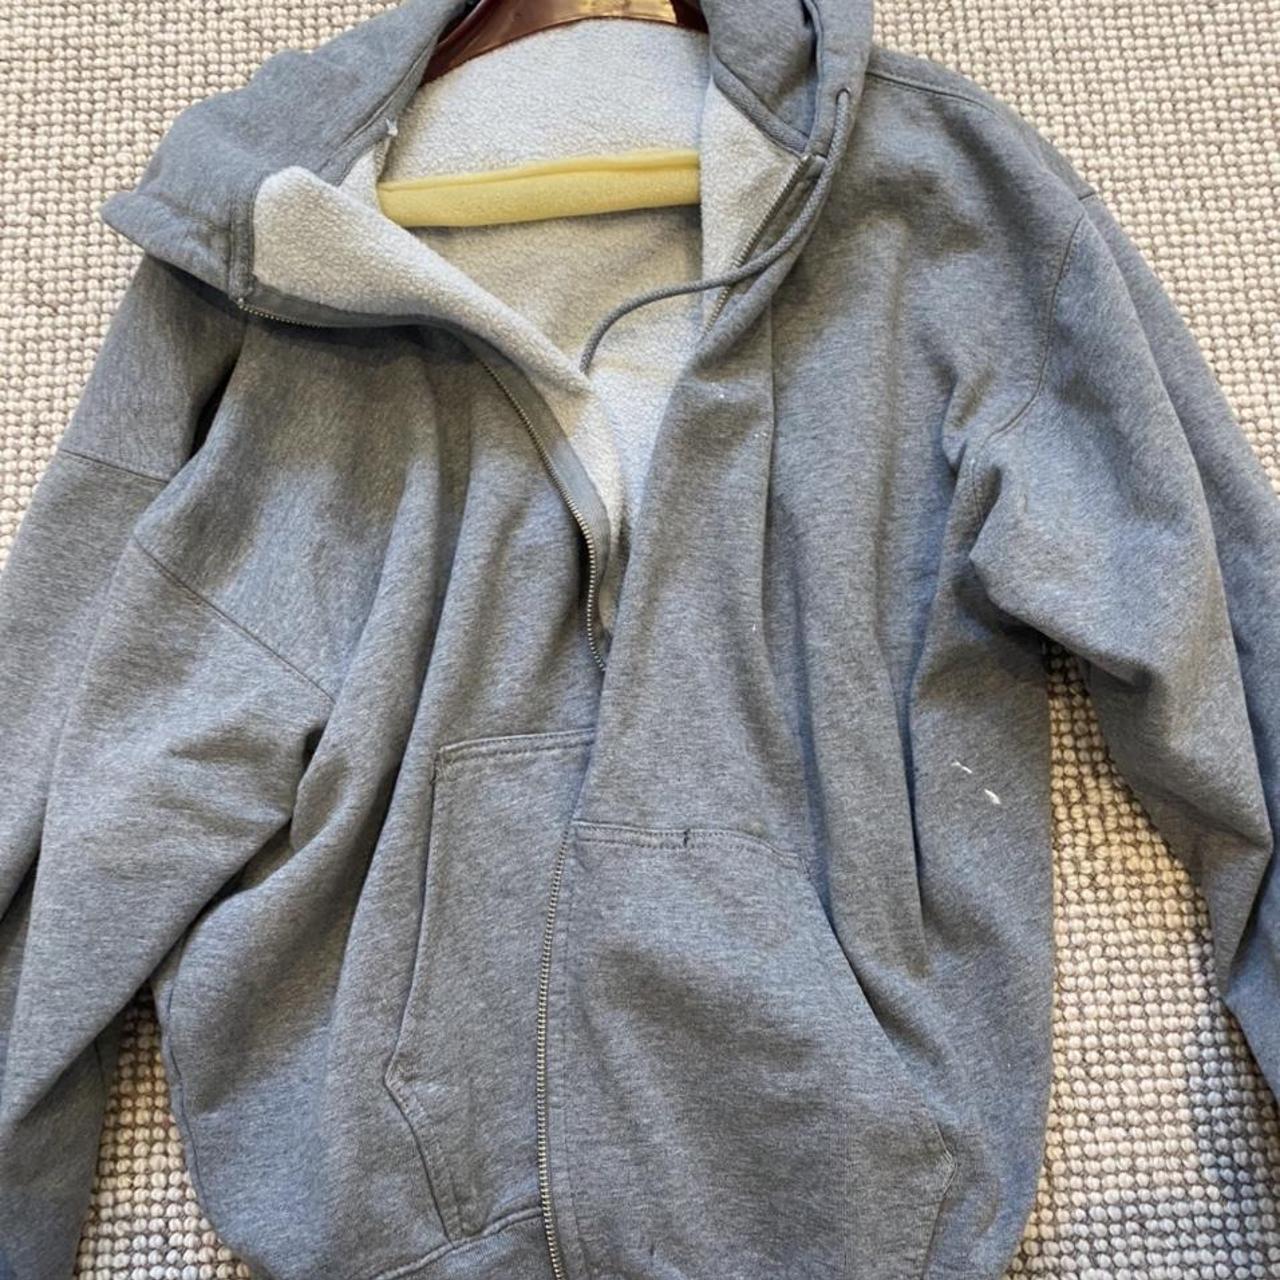 Brandy oversized hoodie with paint flaws - Depop